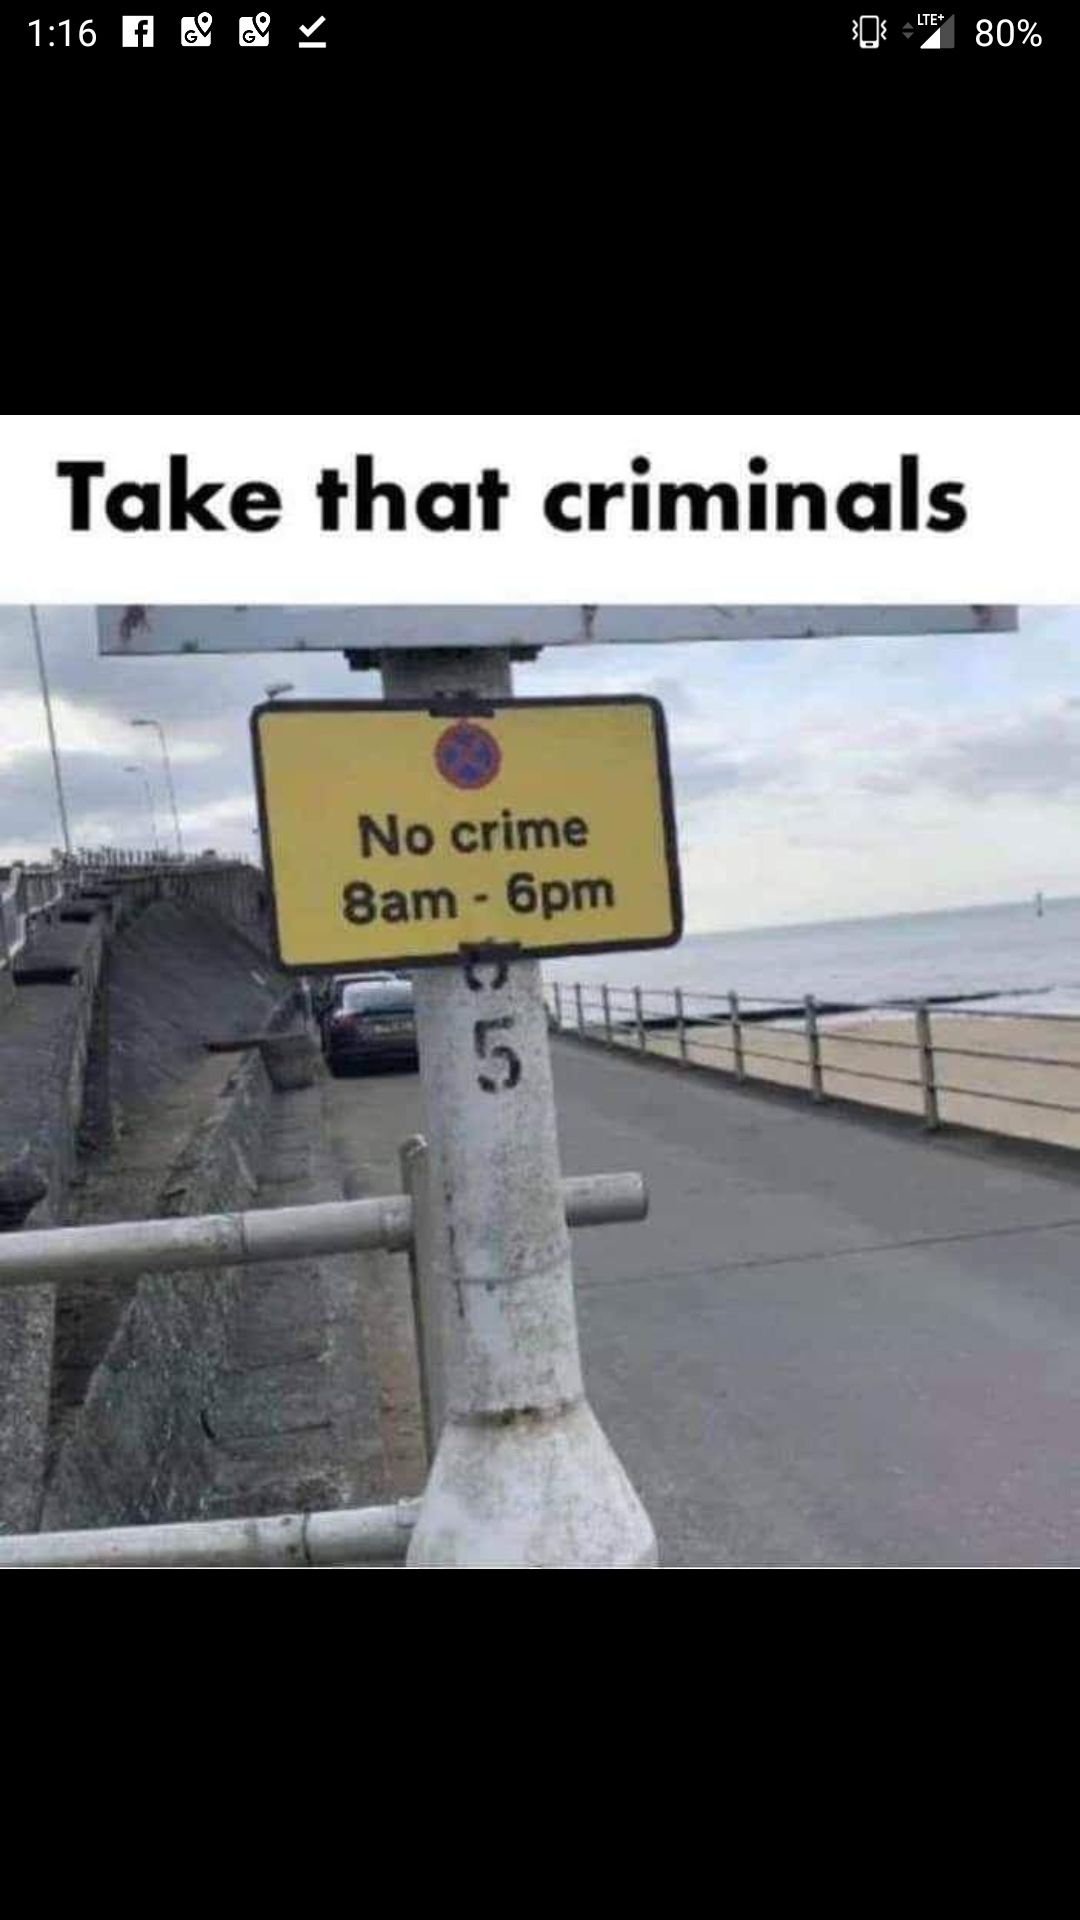 Between 6 pm - 8 am, just say no to crimes.